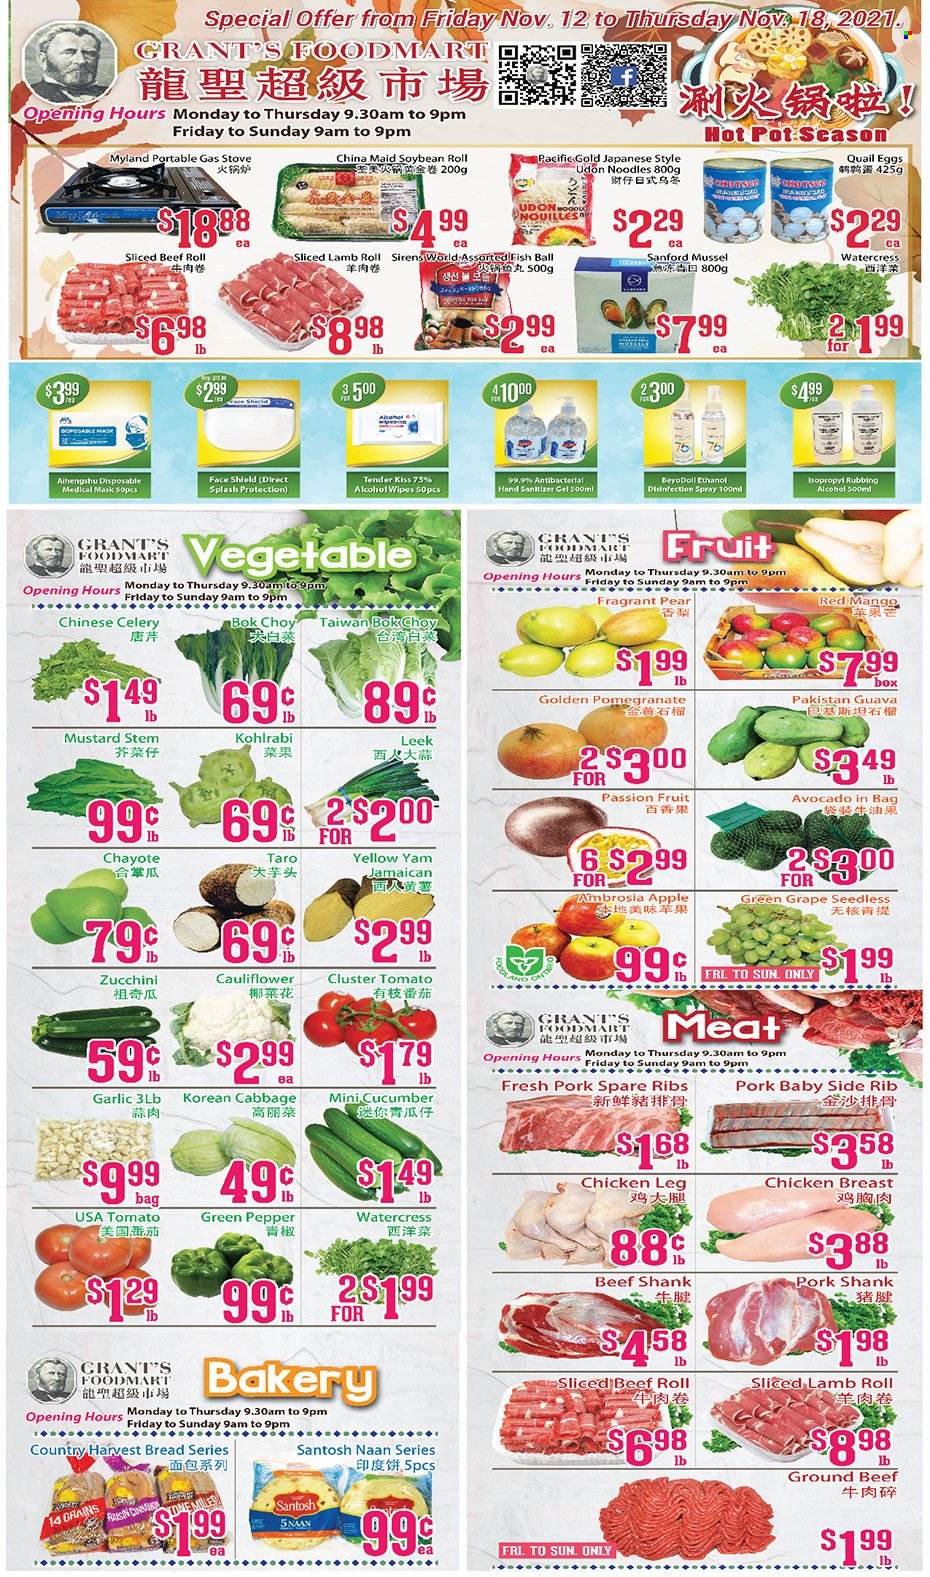 thumbnail - Grant's Foodmart Flyer - November 12, 2021 - November 18, 2021 - Sales products - bread, bok choy, cabbage, cauliflower, celery, garlic, leek, zucchini, green pepper, avocado, guava, mango, pears, pomegranate, chayote, mussels, noodles, eggs, Country Harvest, watercress, mustard, Grant's, quail, chicken breasts, chicken legs, chicken, beef meat, beef shank, ground beef, pork meat, pork ribs, pork spare ribs, hand sanitizer, kohlrabi. Page 1.